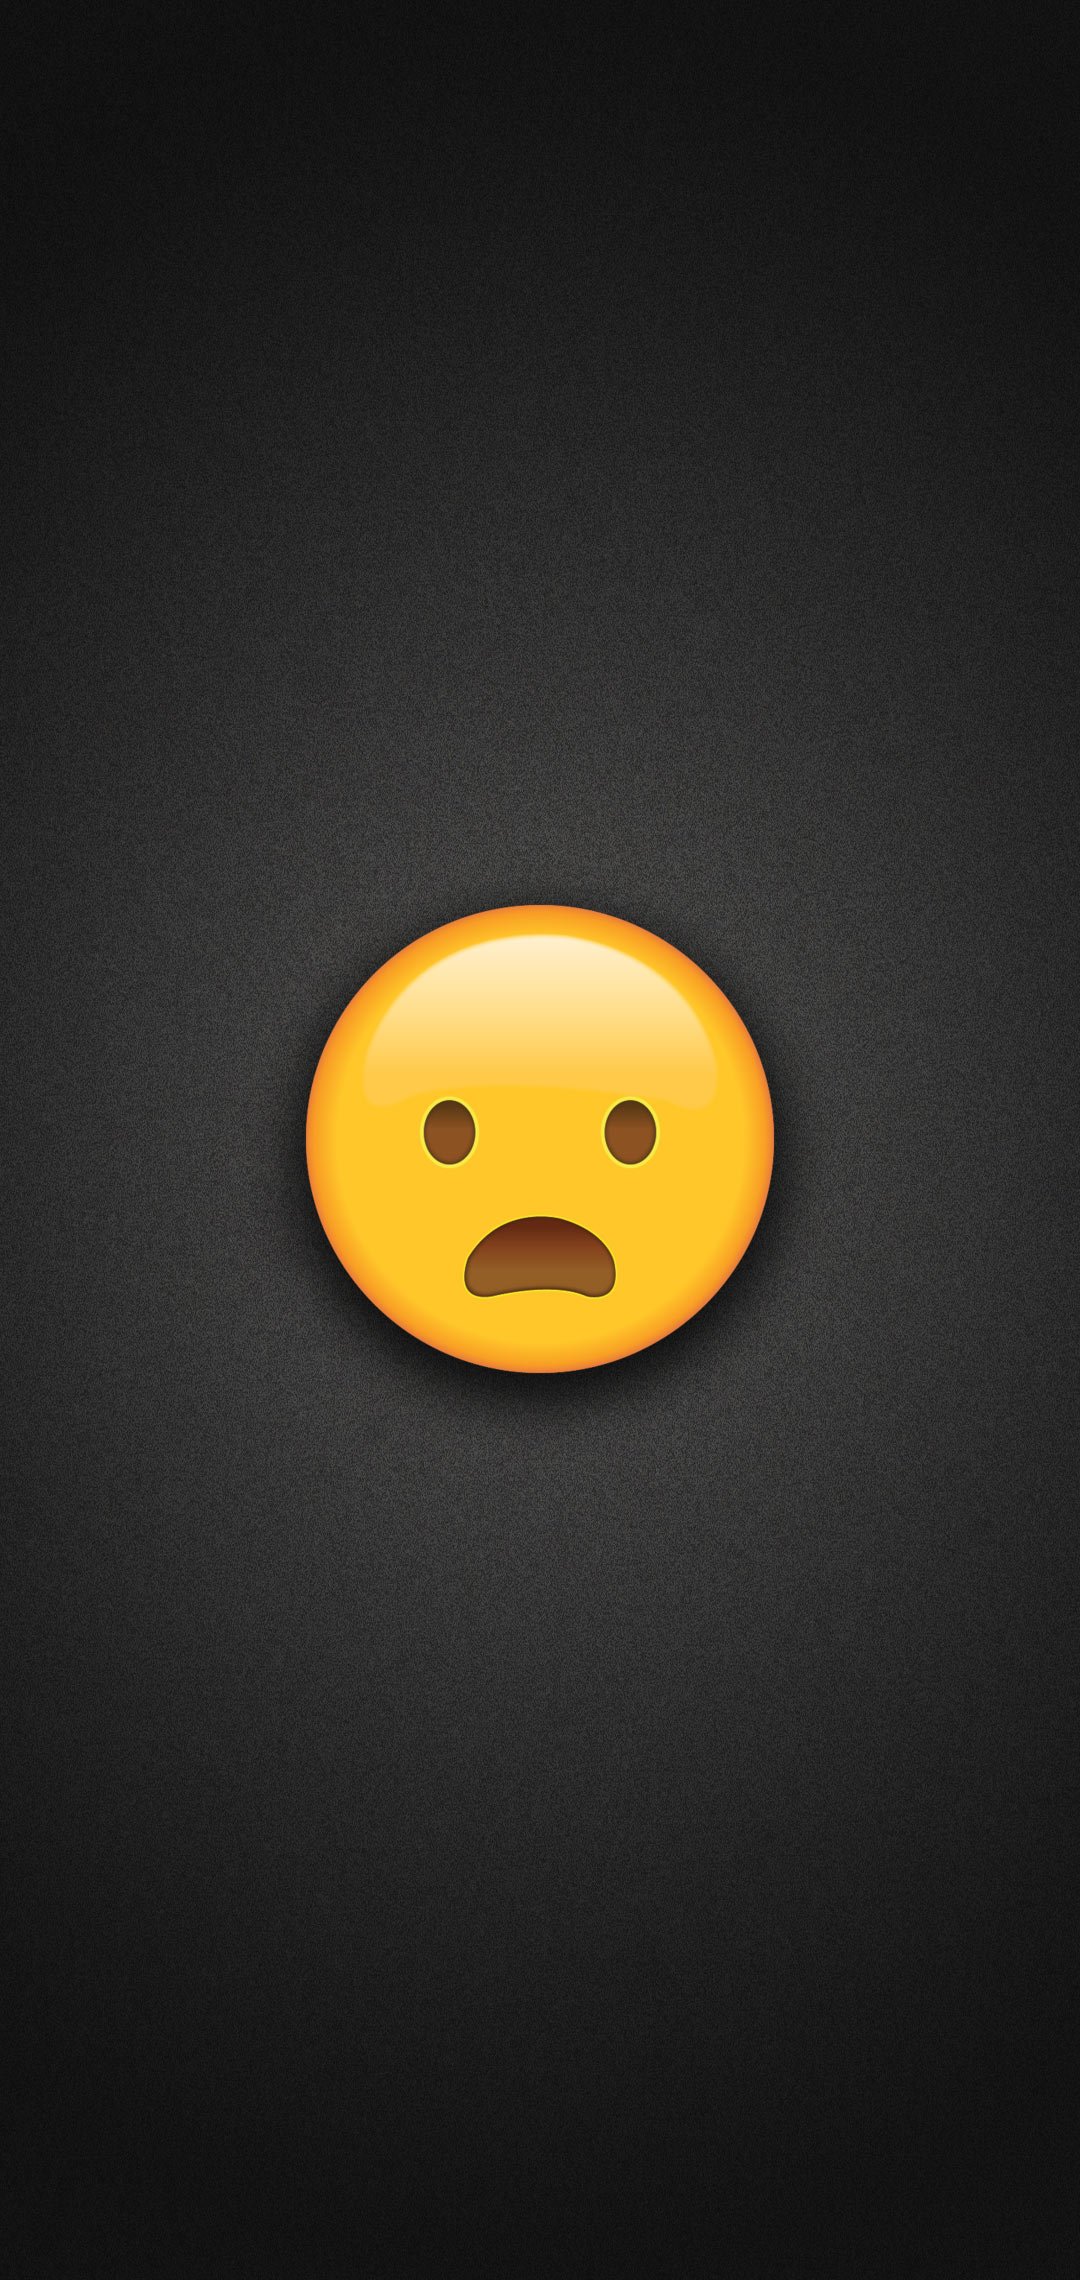 Frowning Face with Open Mouth Emoji Phone Wallpaper